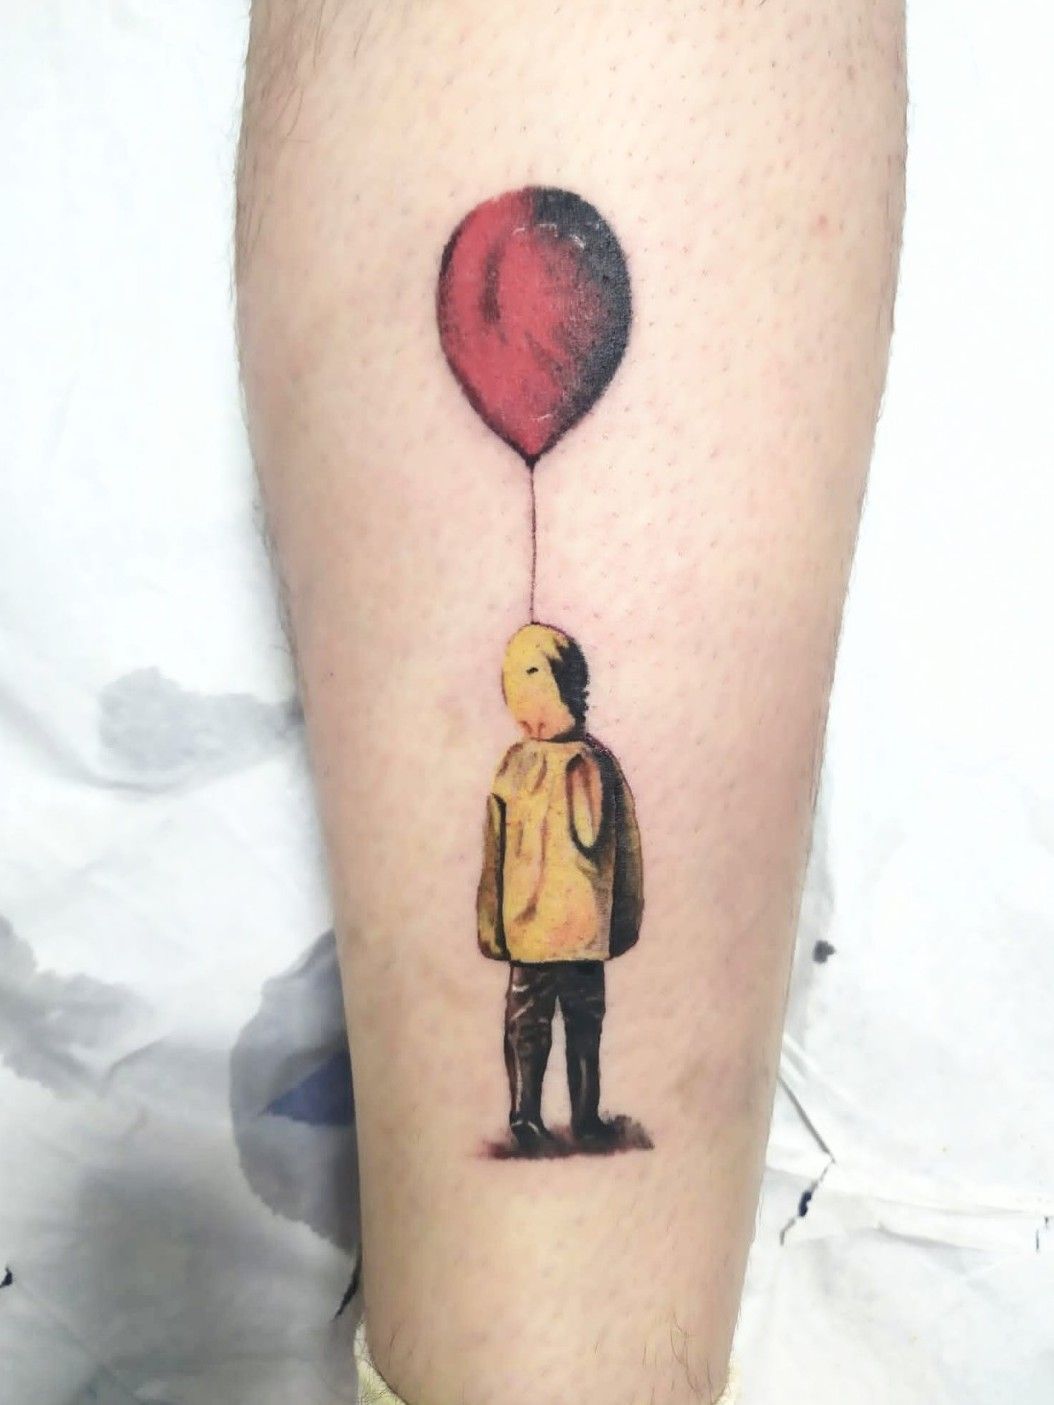 UPDATED 25 Pennywise Tattoos to Grab Attention